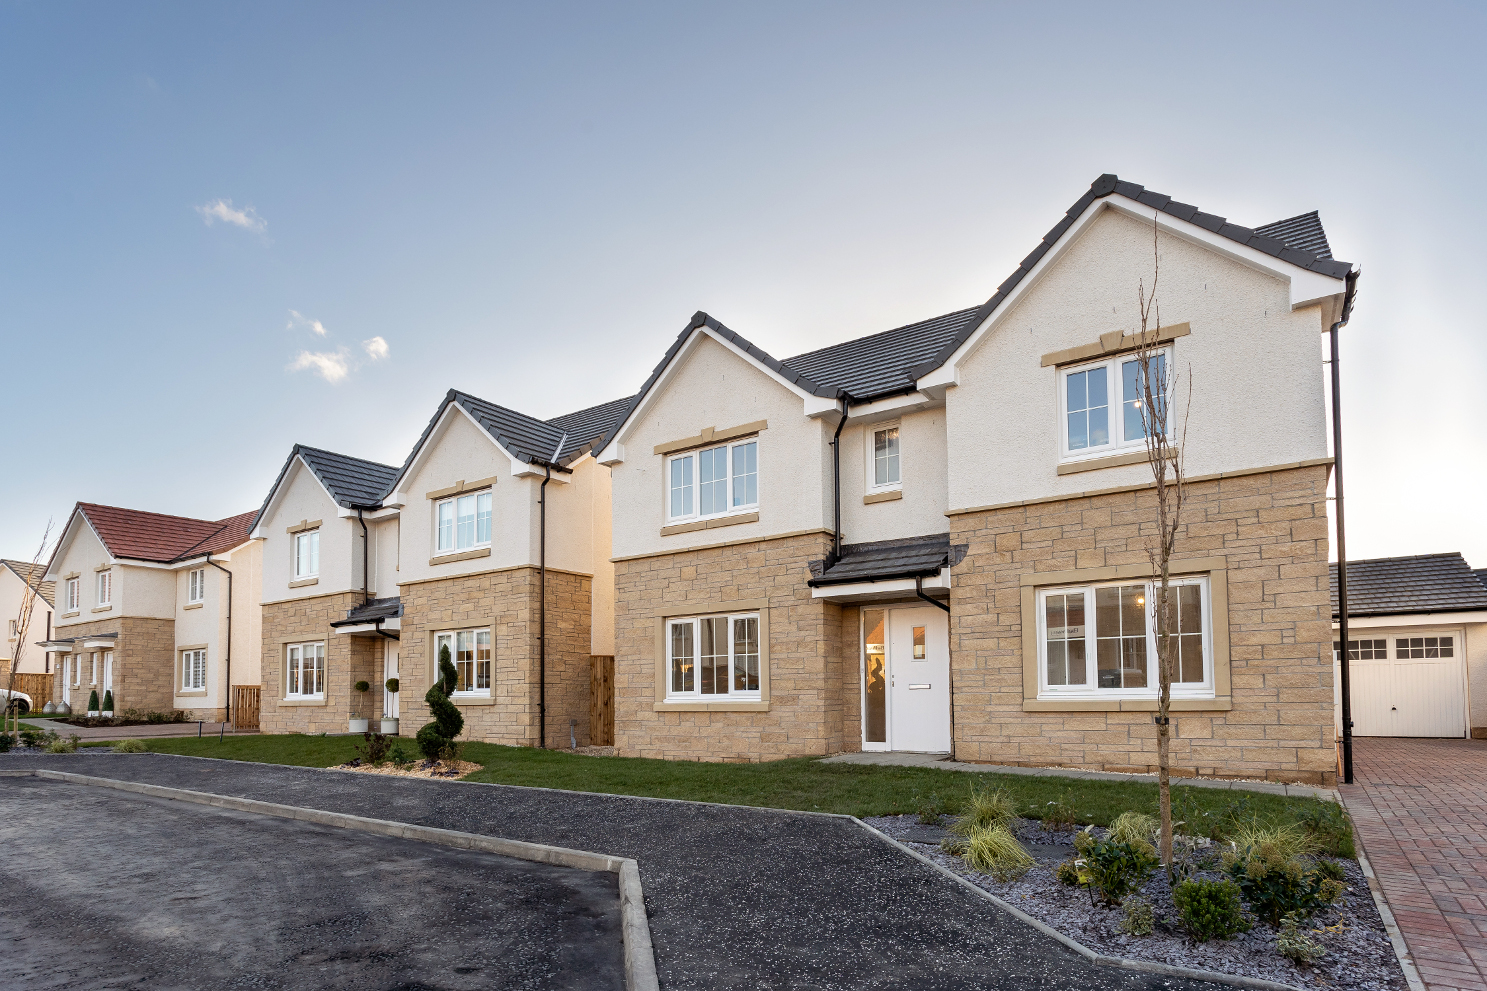 Bellway to deliver almost 1,000 new homes with landmark investment